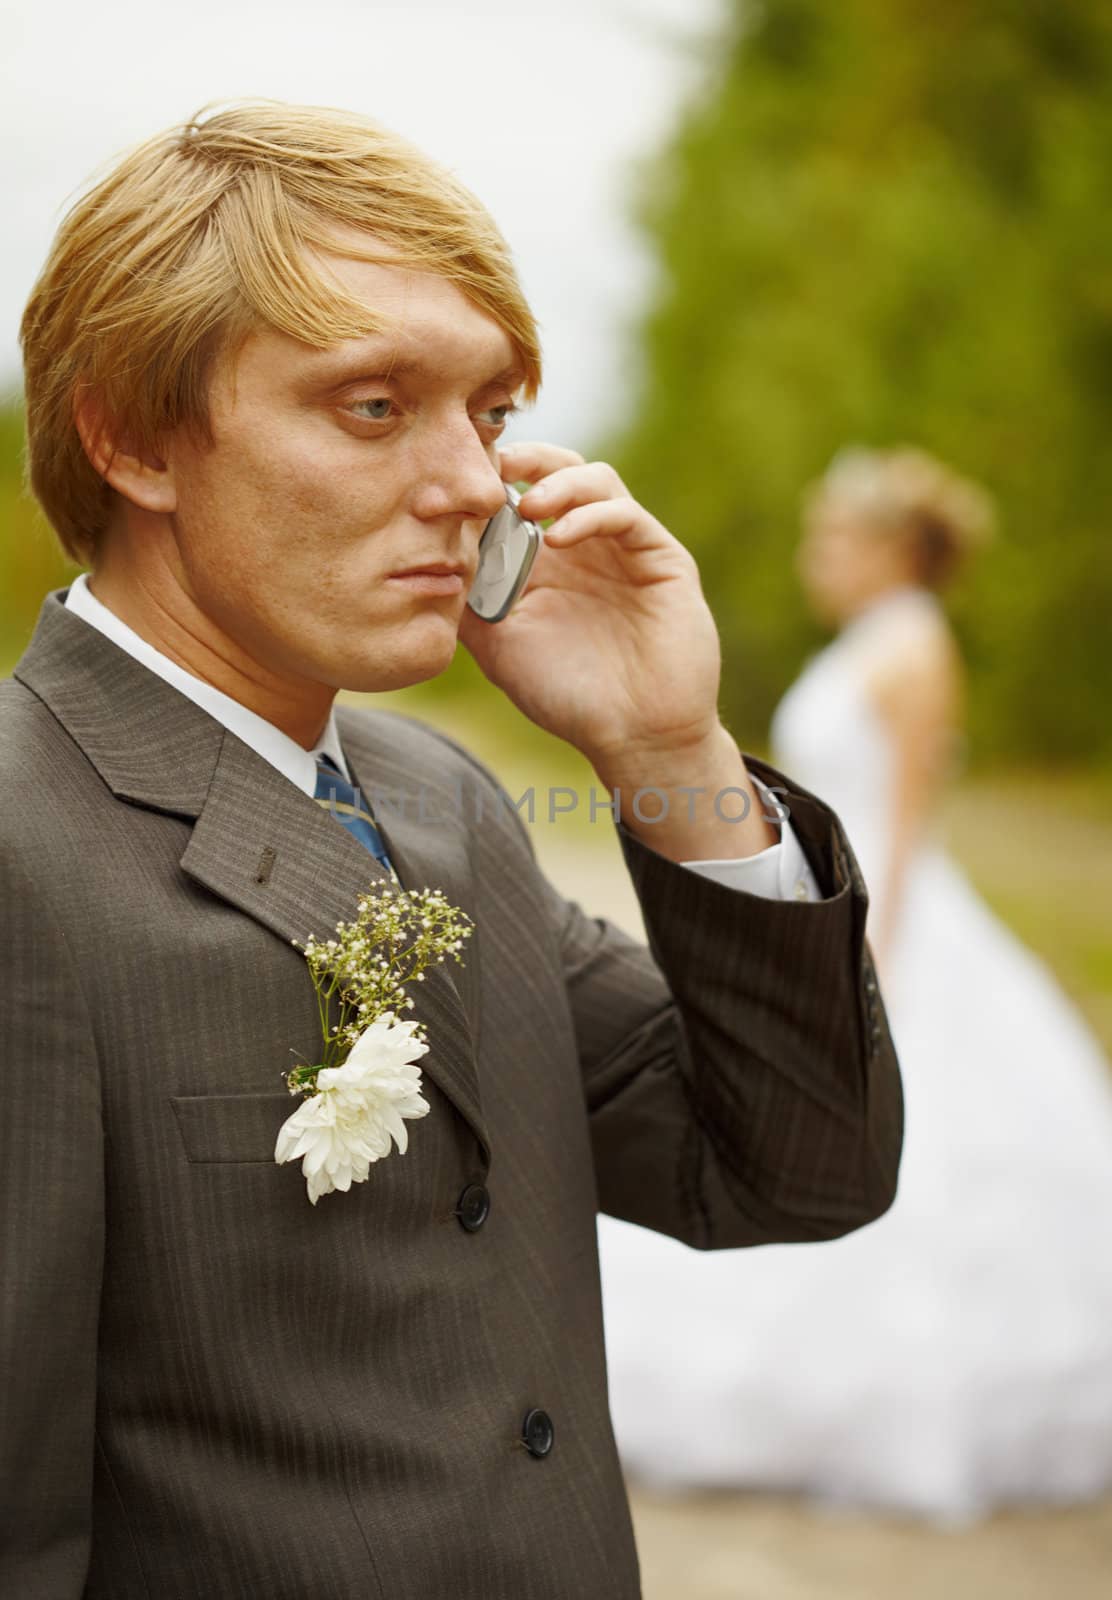 The groom speaks by phone having forgotten about the bride